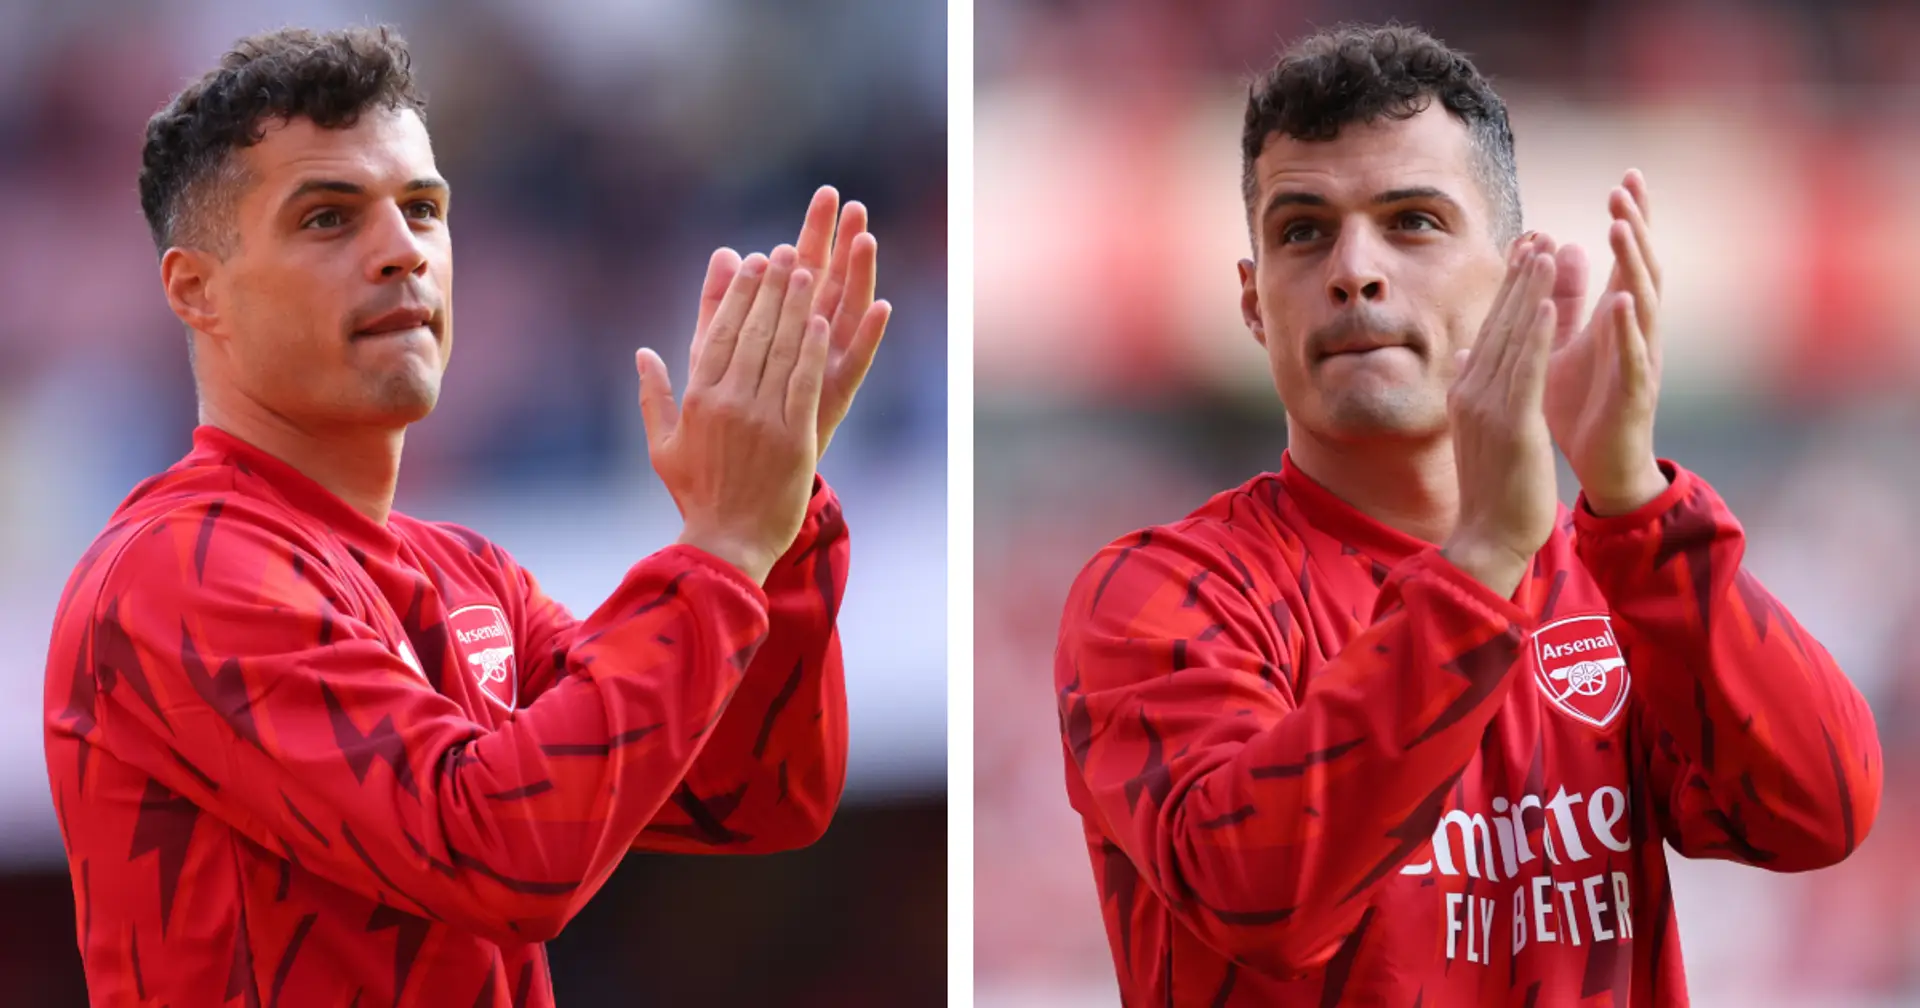 'Man taught me important life lessons': Arsenal fans bid farewell to Granit Xhaka